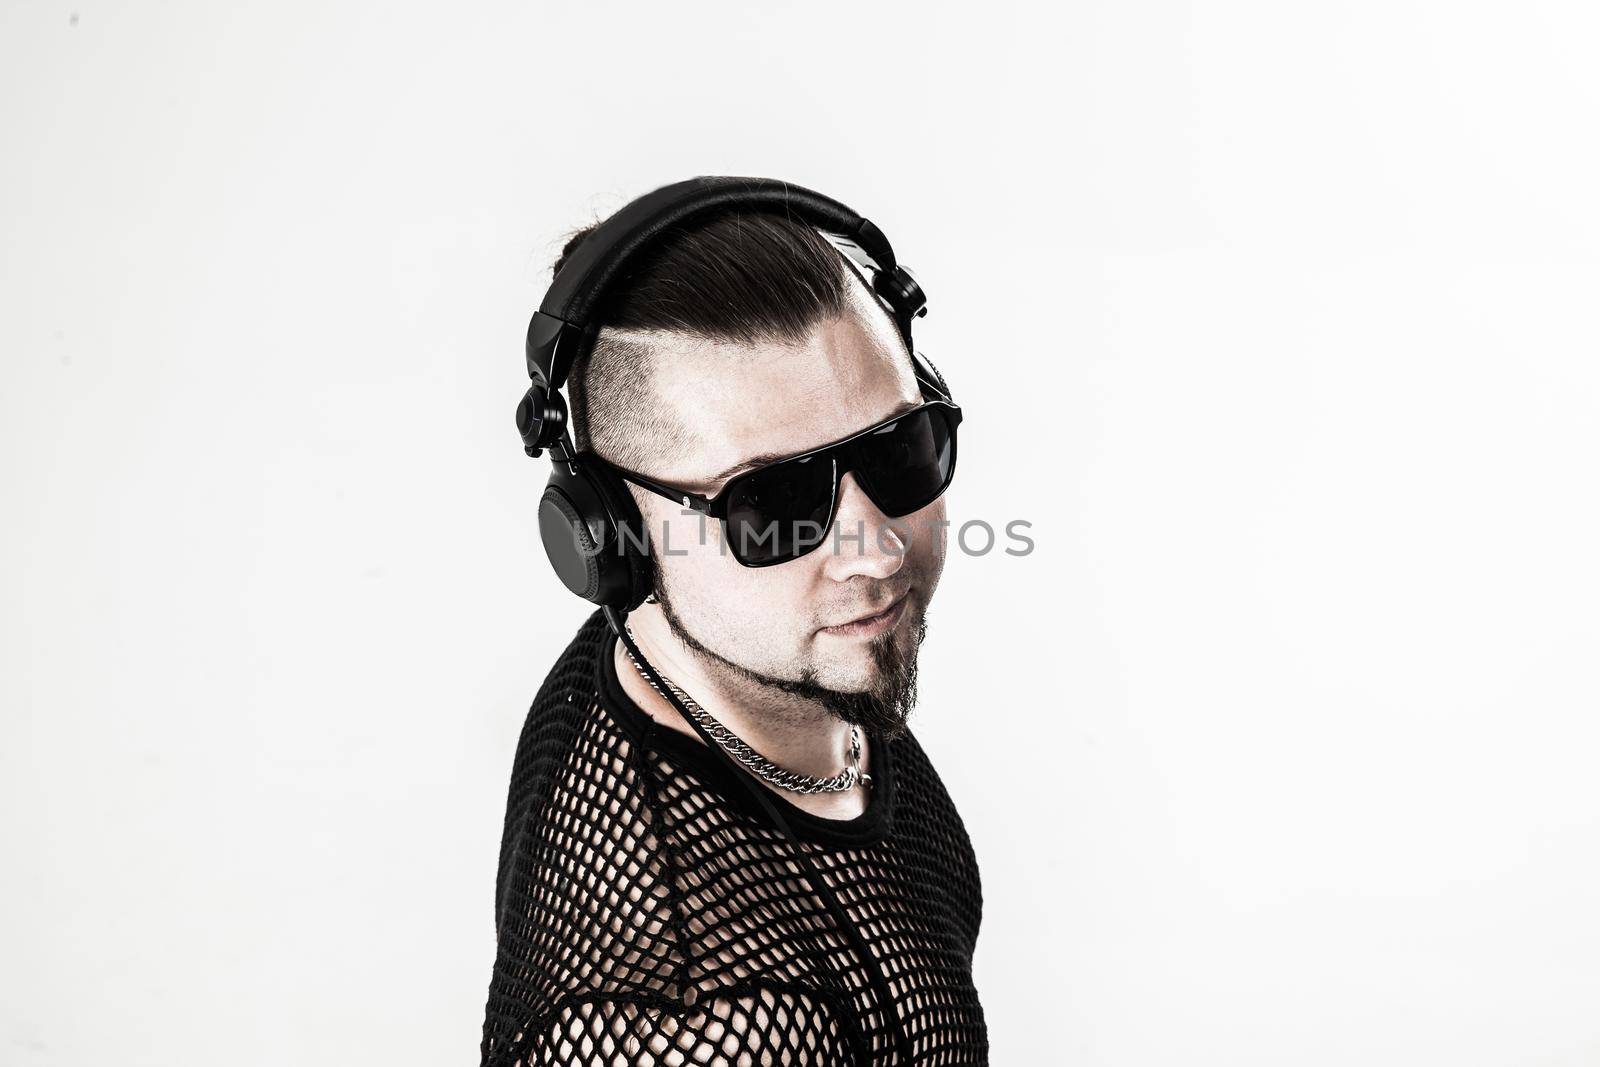 charismatic DJ - rapper with headphones on a light background.the photo has a empty space for your text